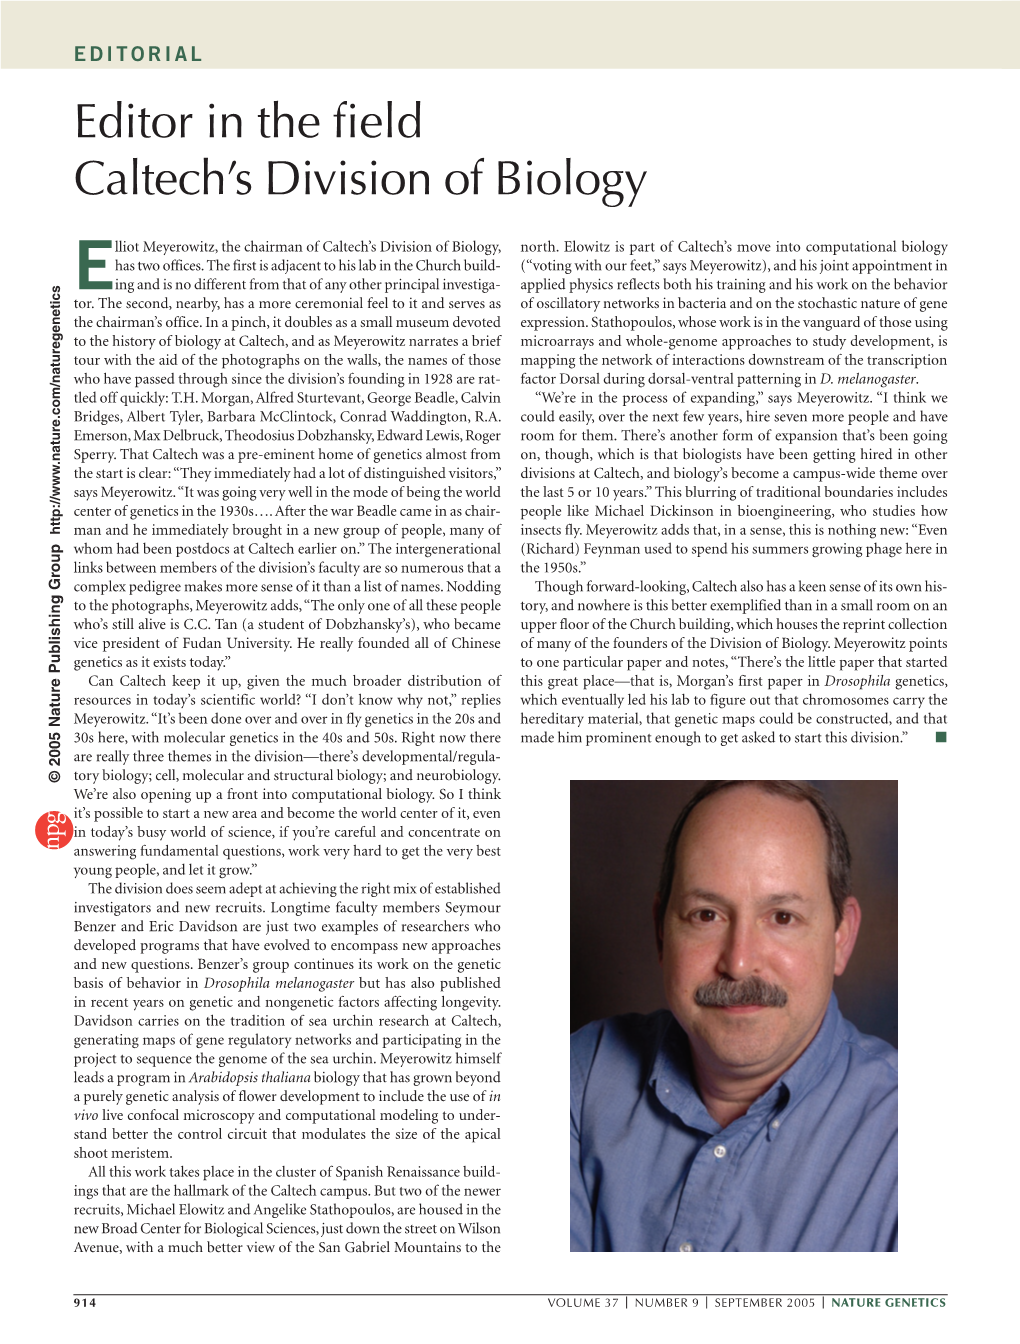 Editor in the Field Caltech's Division of Biology